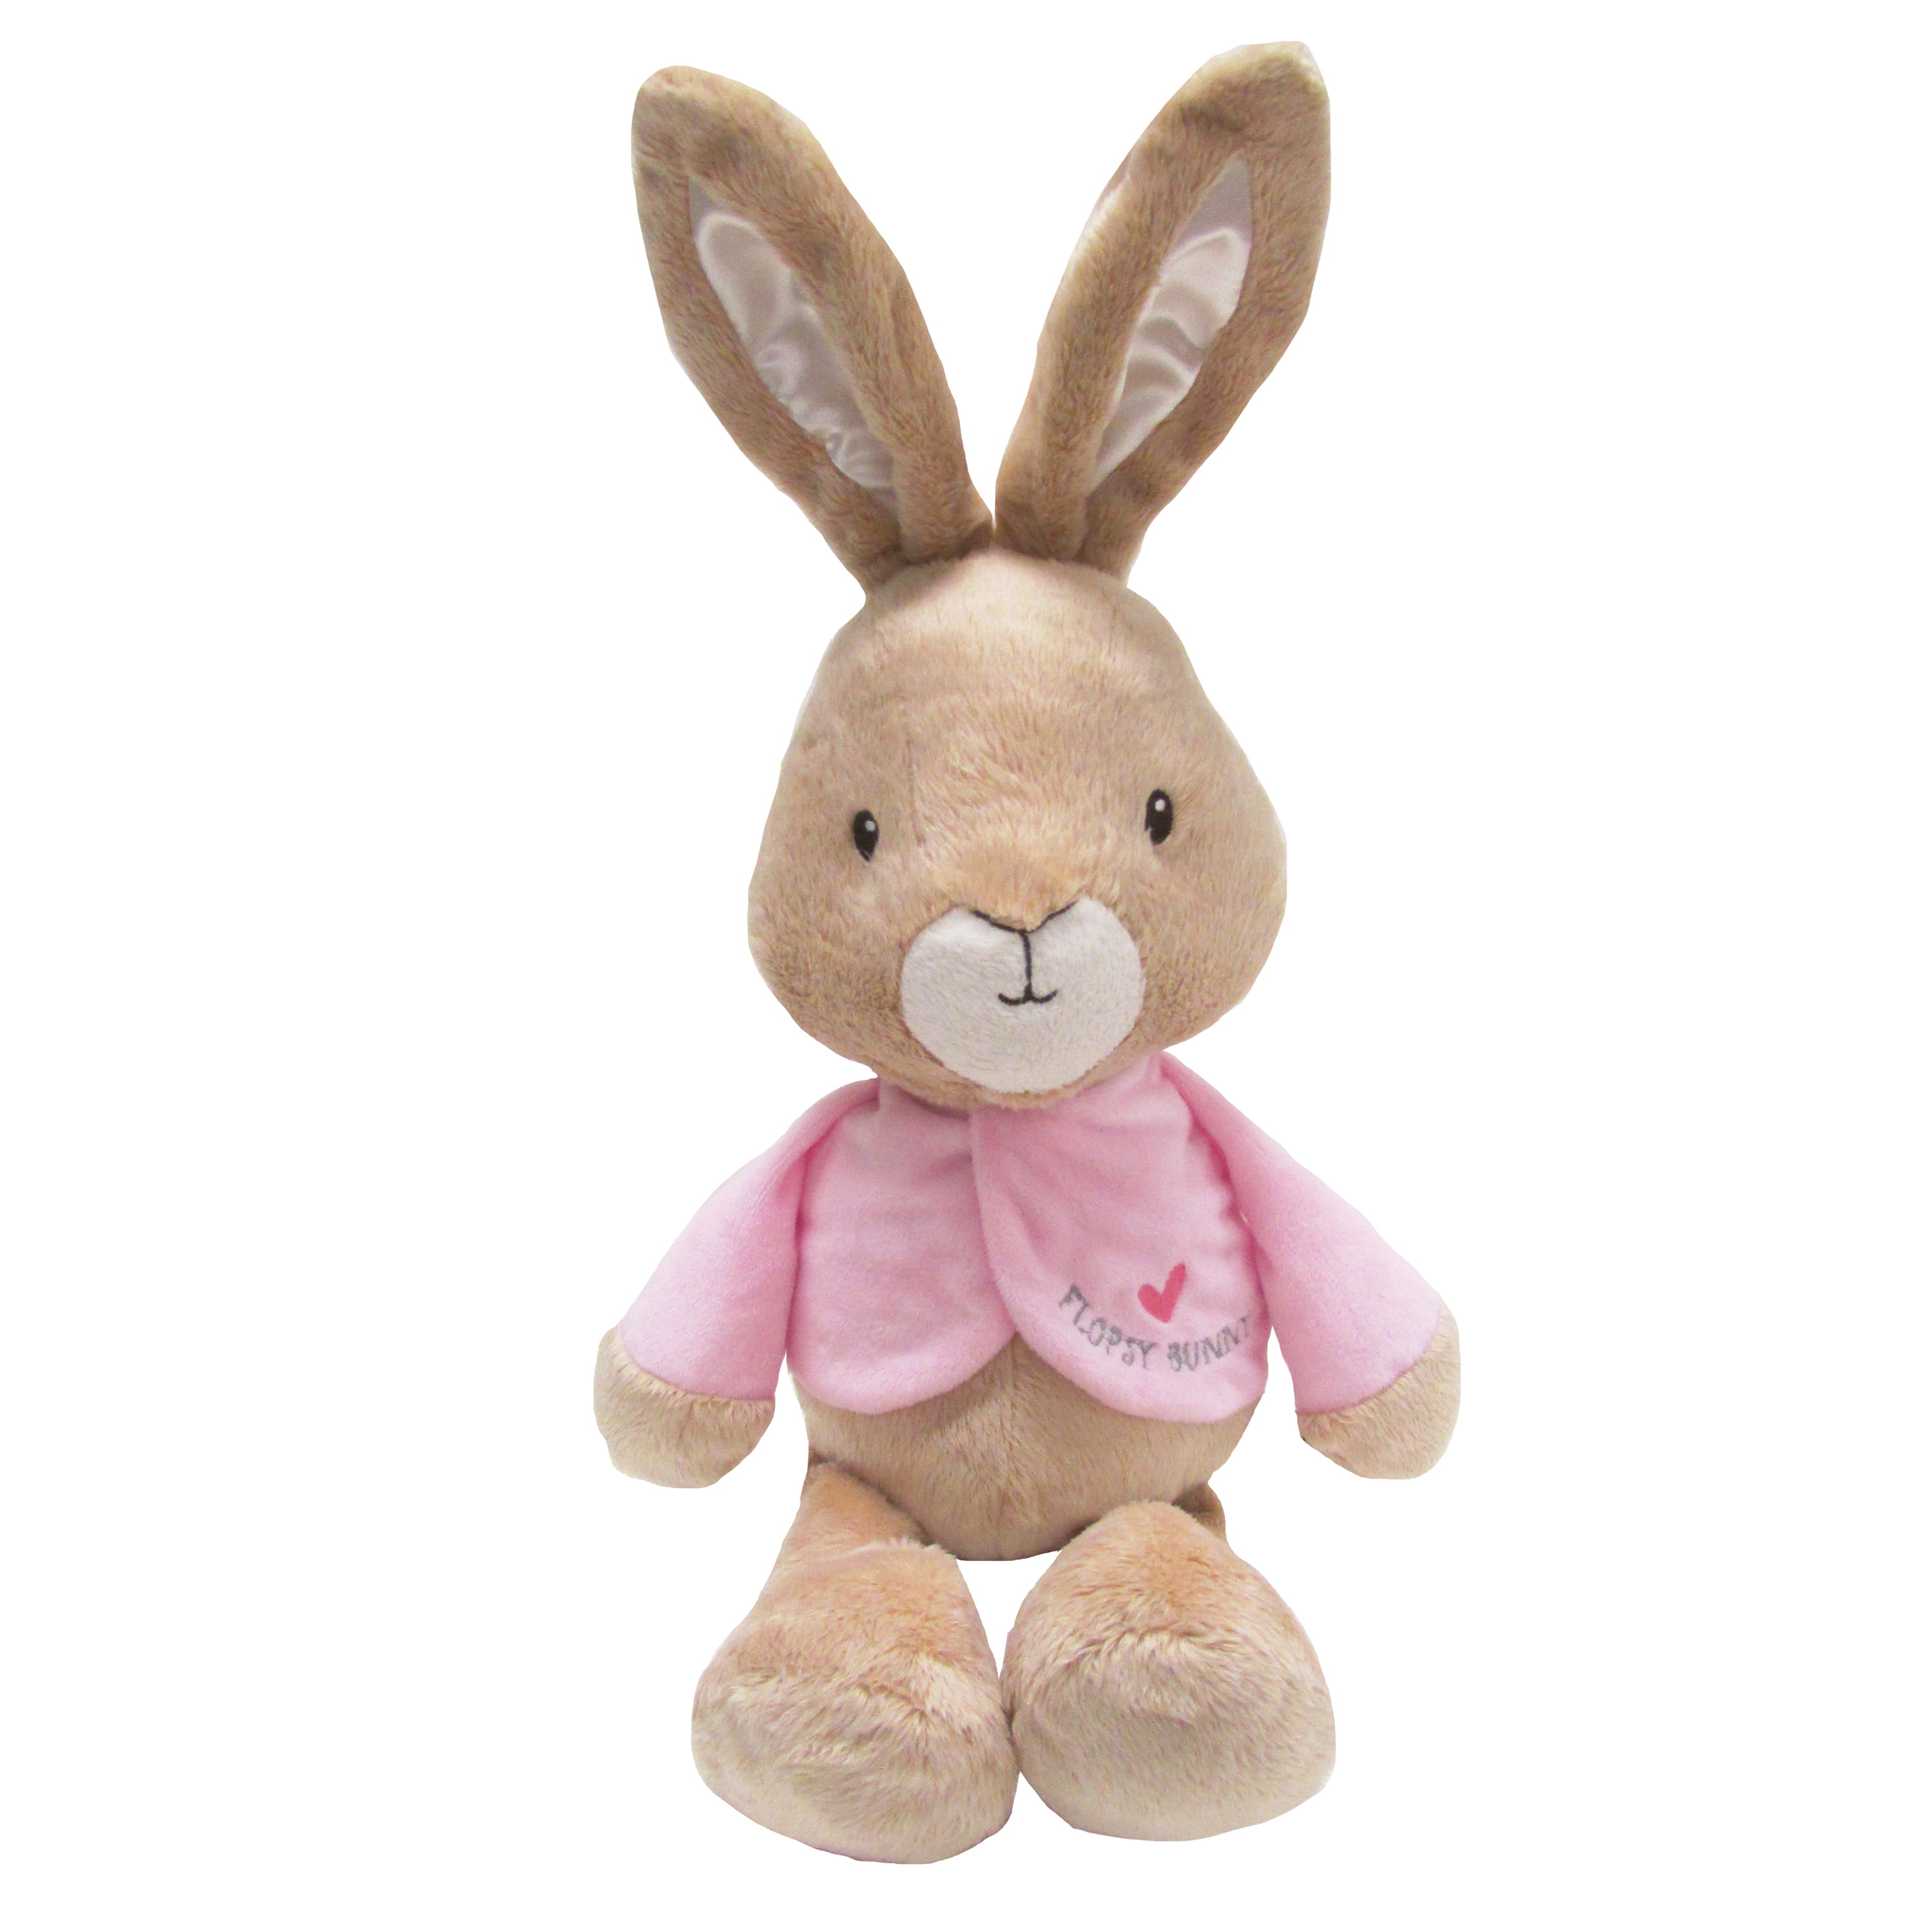 MY FIRST FLOPSY BUNNY SOFT PLUSH TOY OFFICIAL BEATRIX POTTER PETER RABBIT BNWT 